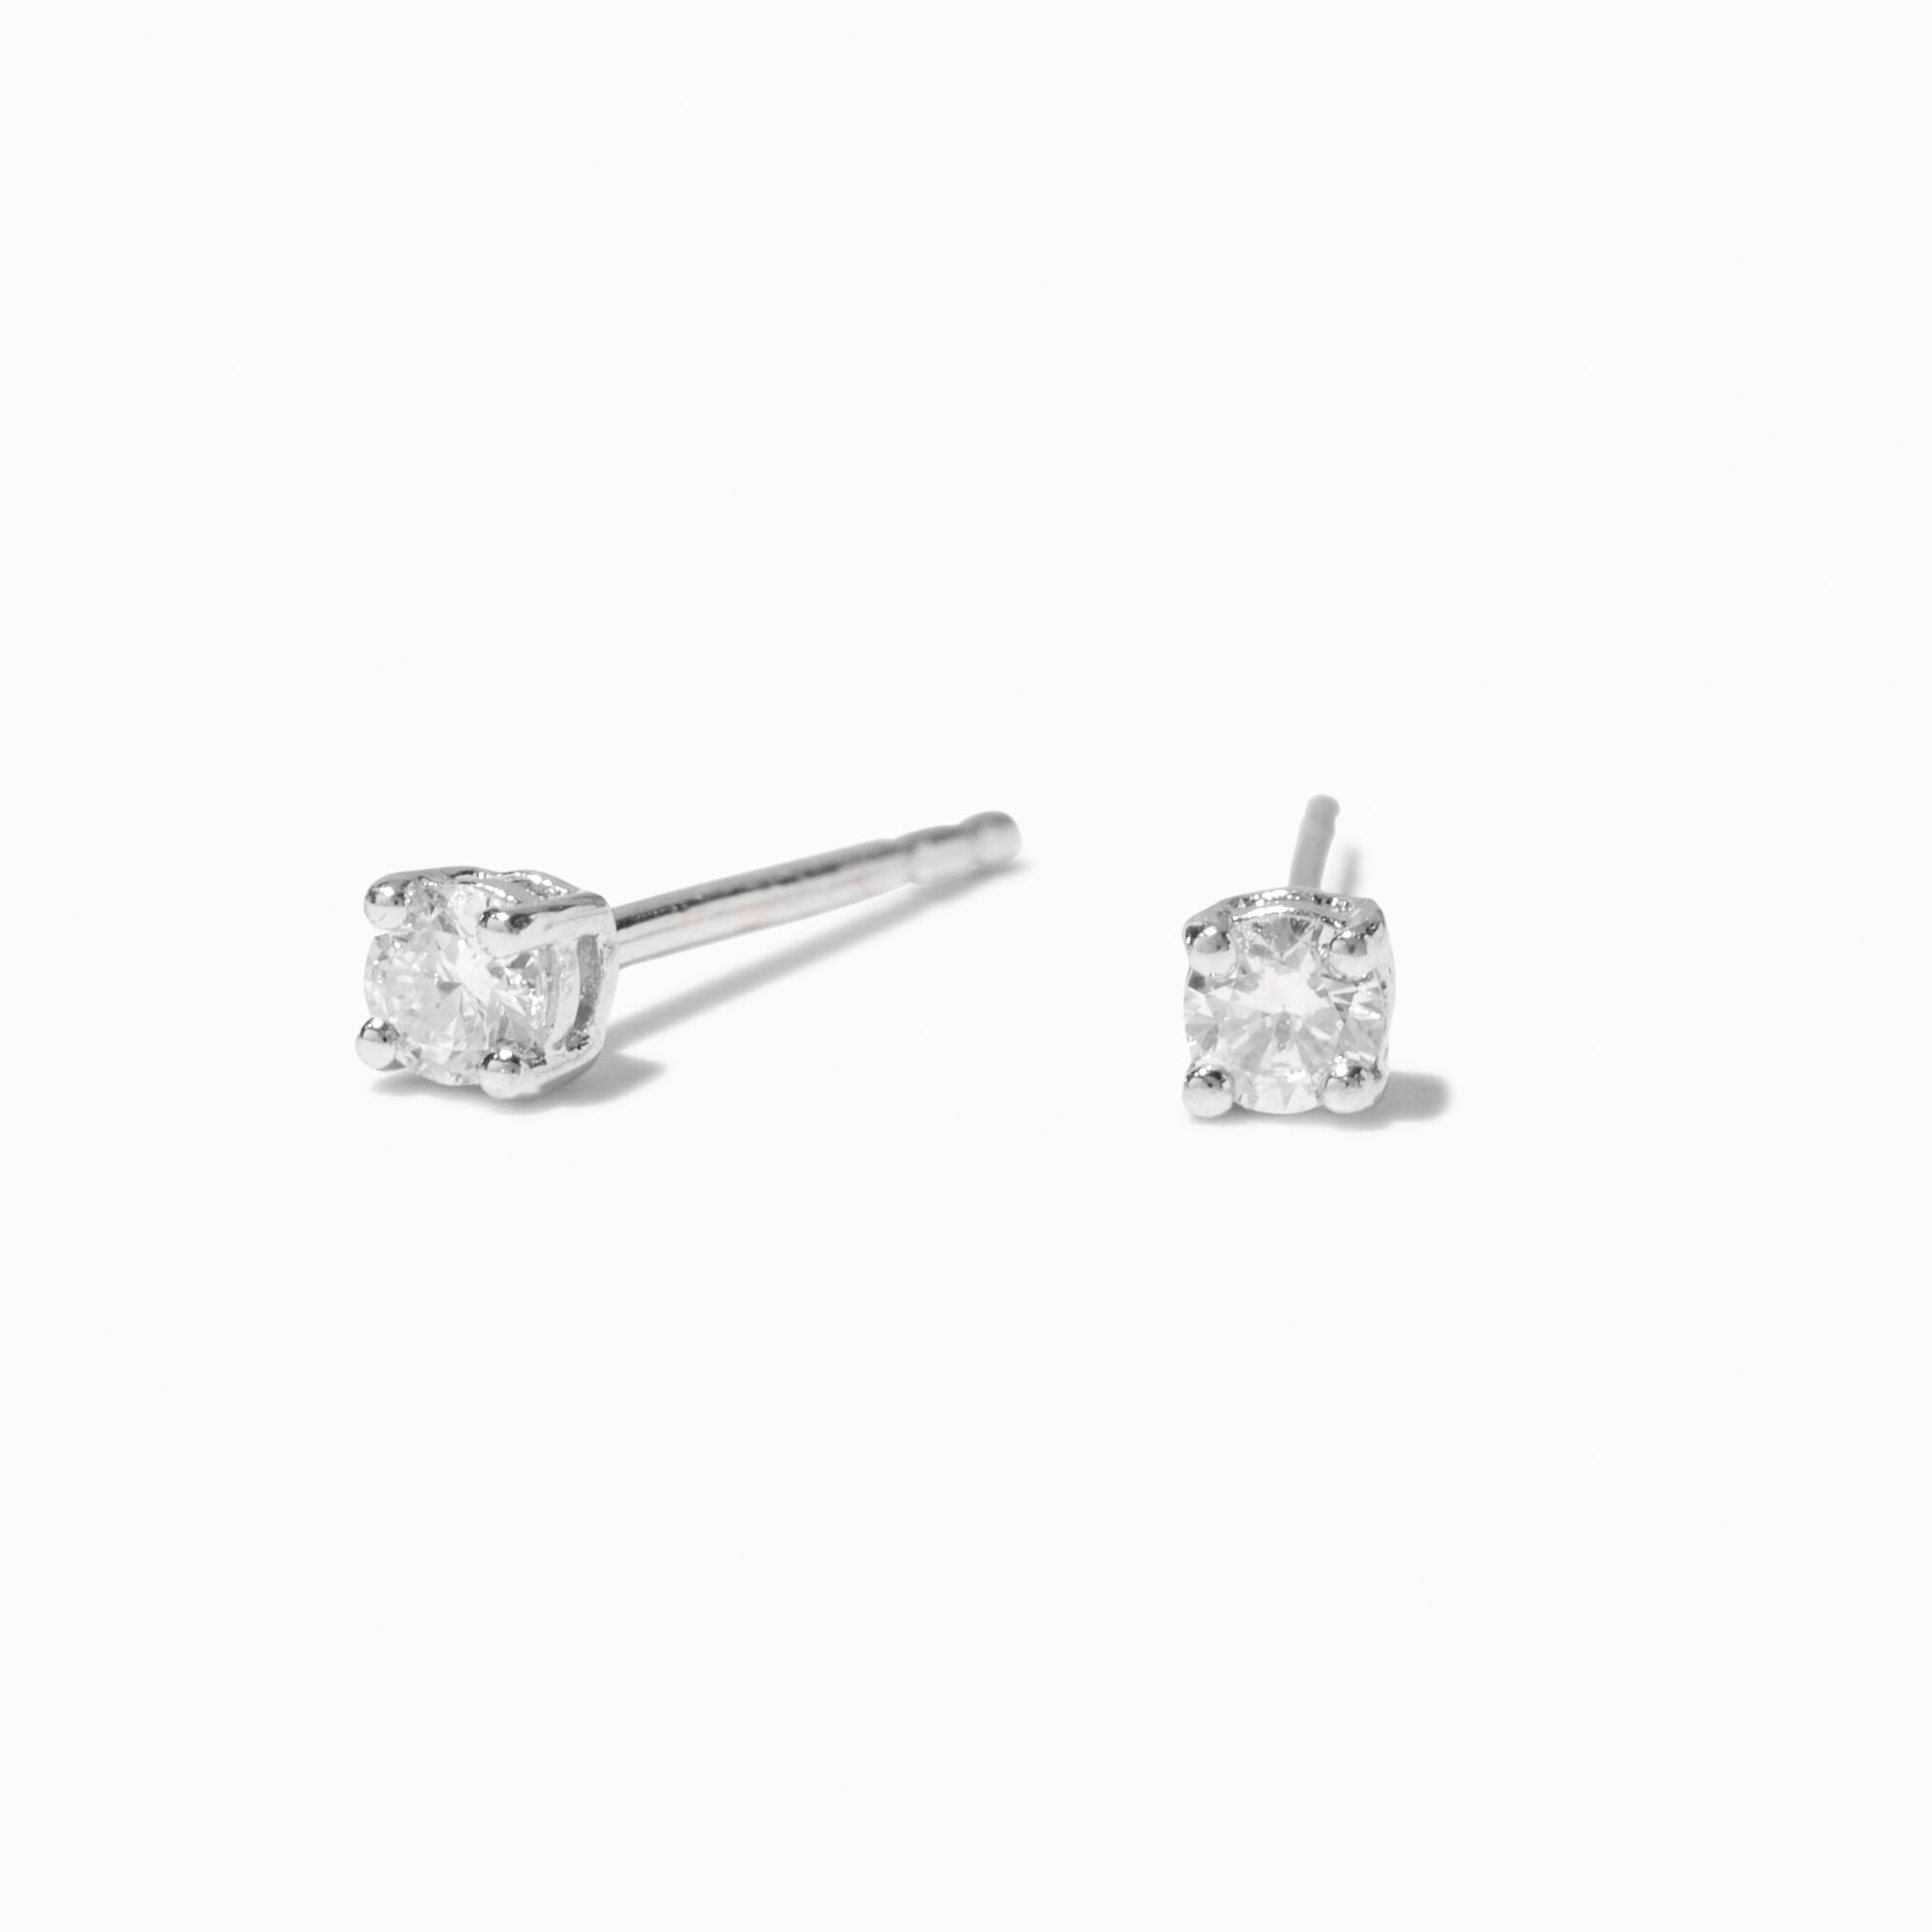 View C Luxe By Claires 110 Ct Tw Round Basket Laboratory Grown Diamond 3MM Stud Earrings Silver information